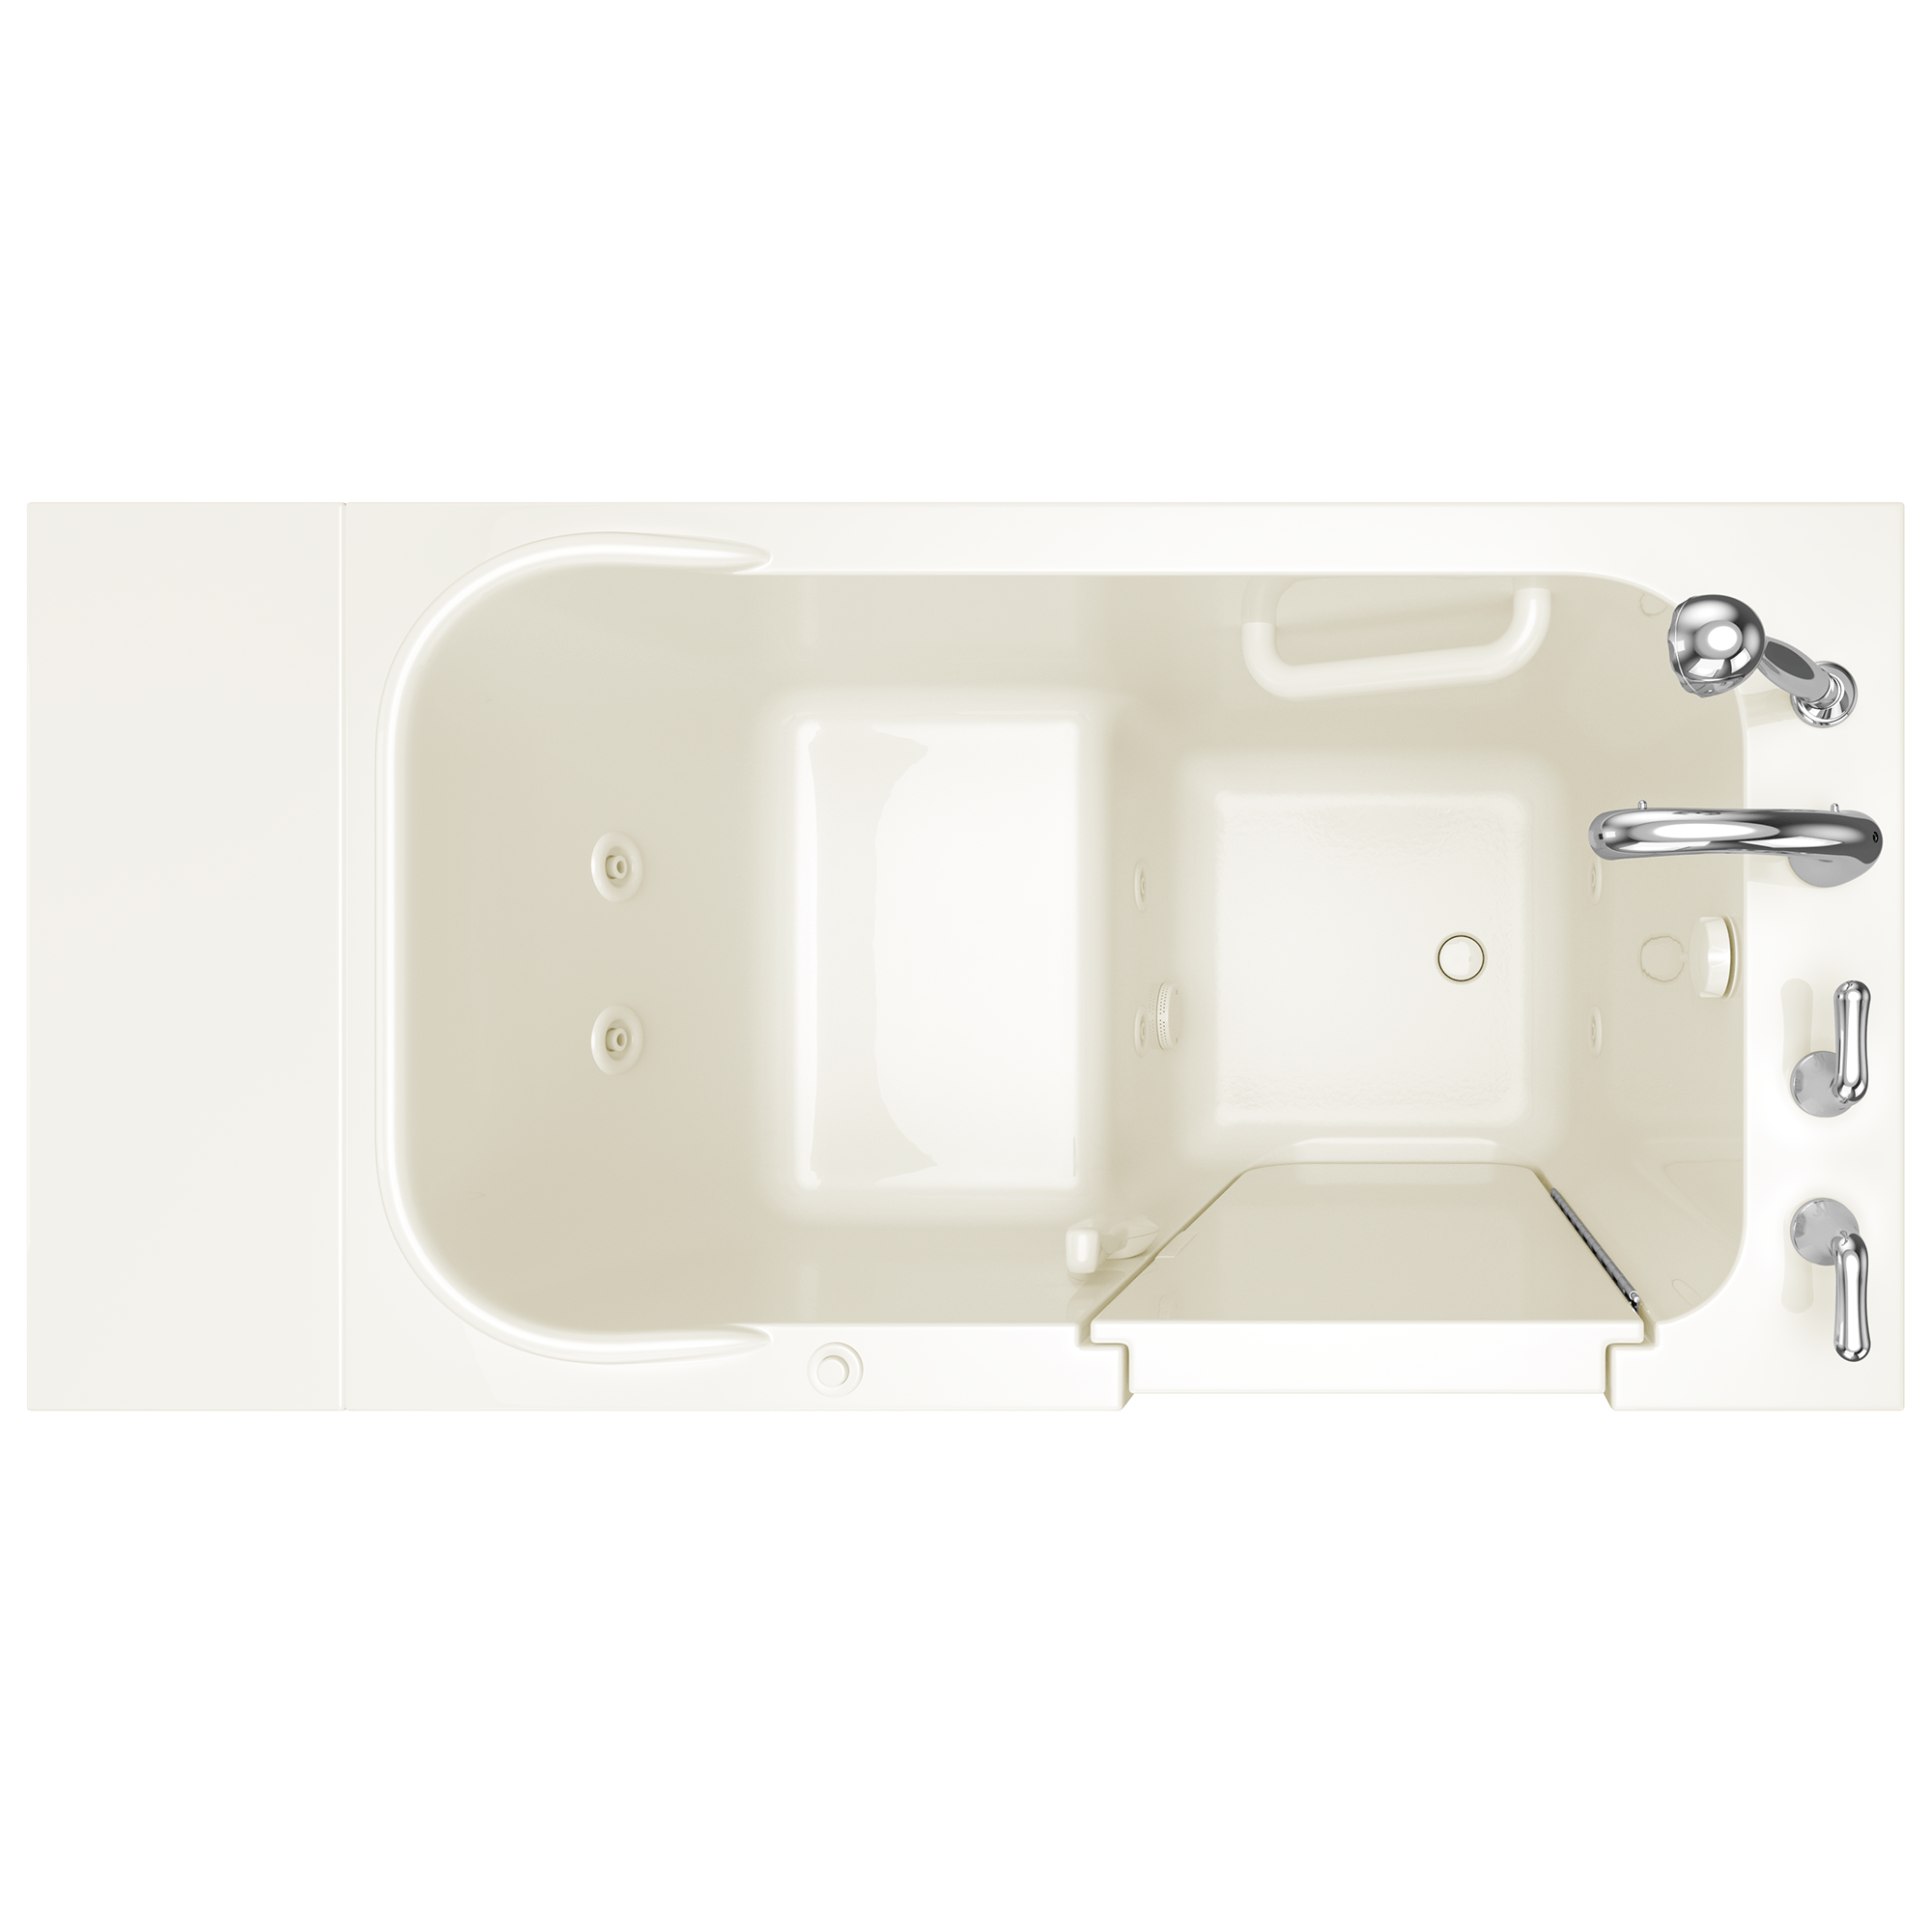 Gelcoat Entry Series 48 x 28-Inch Walk-In Tub With Whirlpool System – Right-Hand Drain With Faucet